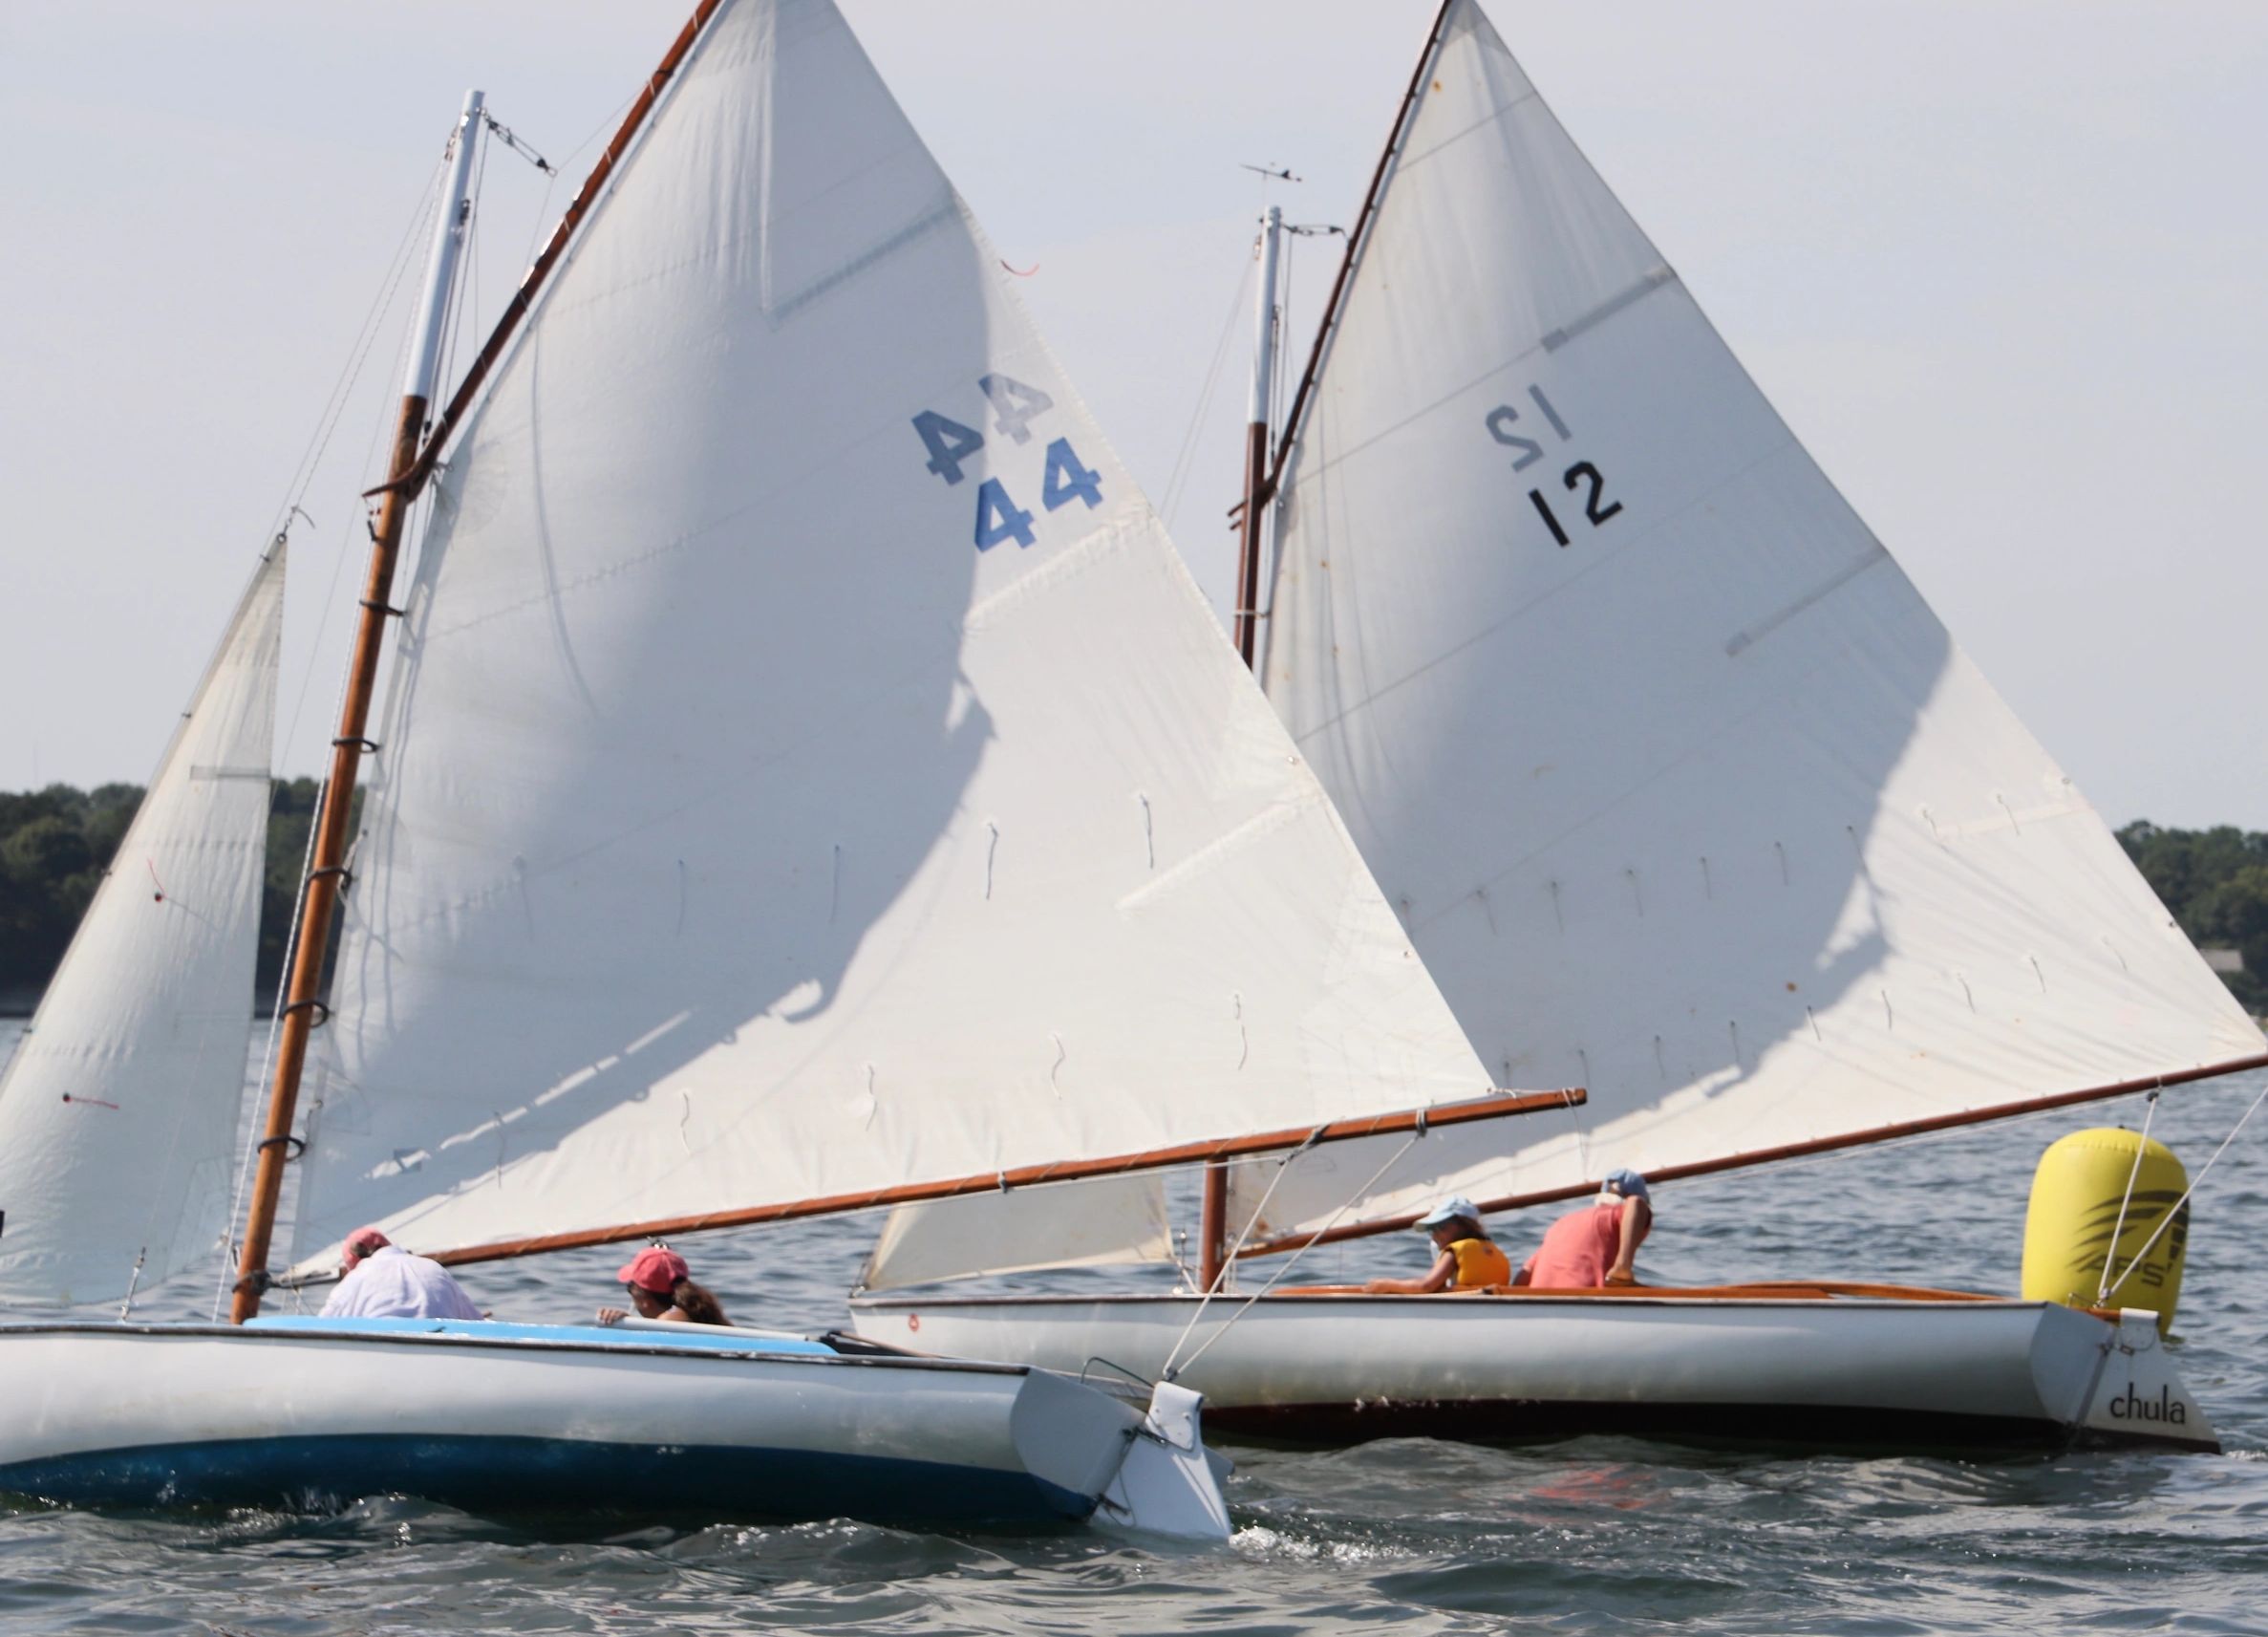 Two NSA BayBirds racing past a mark in the Sunday Adult Sailing program on Pleasant Bay